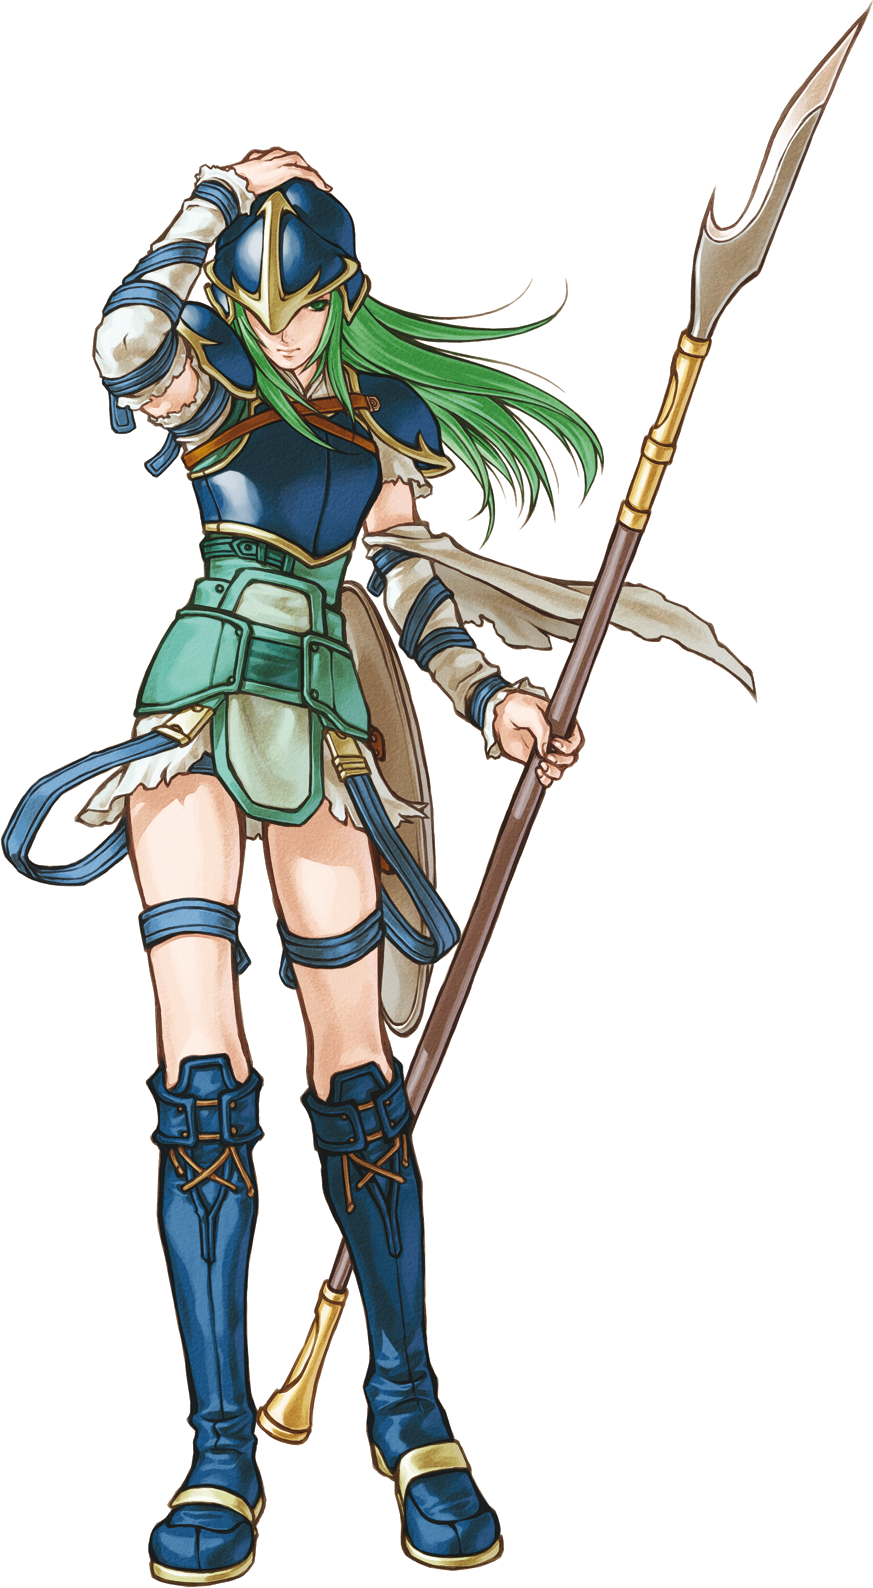 Artwork of Nephenee from Path of Radiance. A young woman with long green hair wearing blue armor and a helmet that she holds onto her head with one hand. In the other hand she holds a spear. A round shield is strapped to her hip.